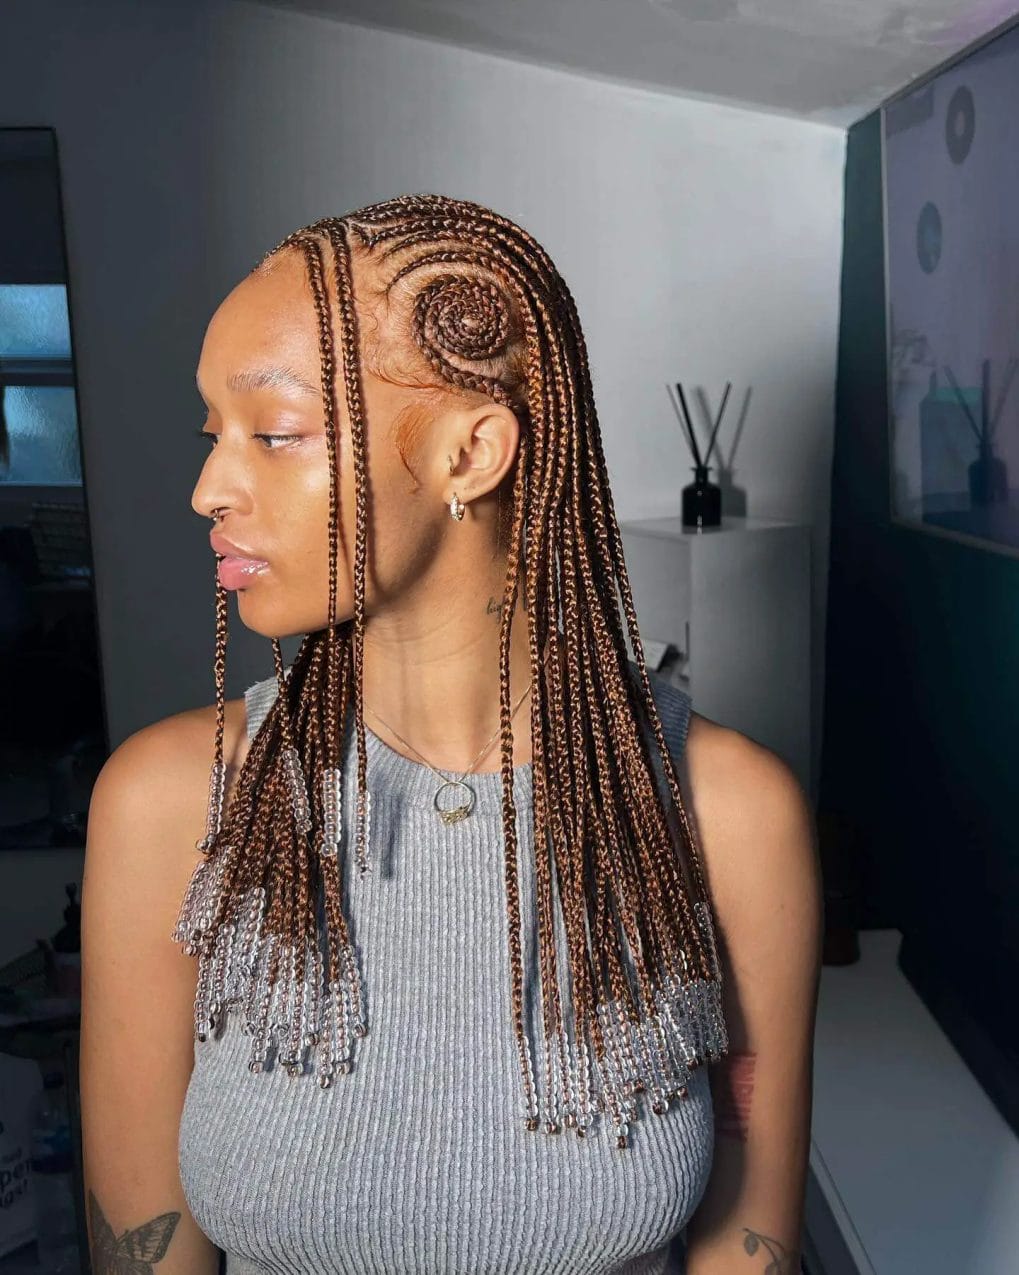 Intricate caramel-toned braids in a spiral pattern with shimmering silver beads.